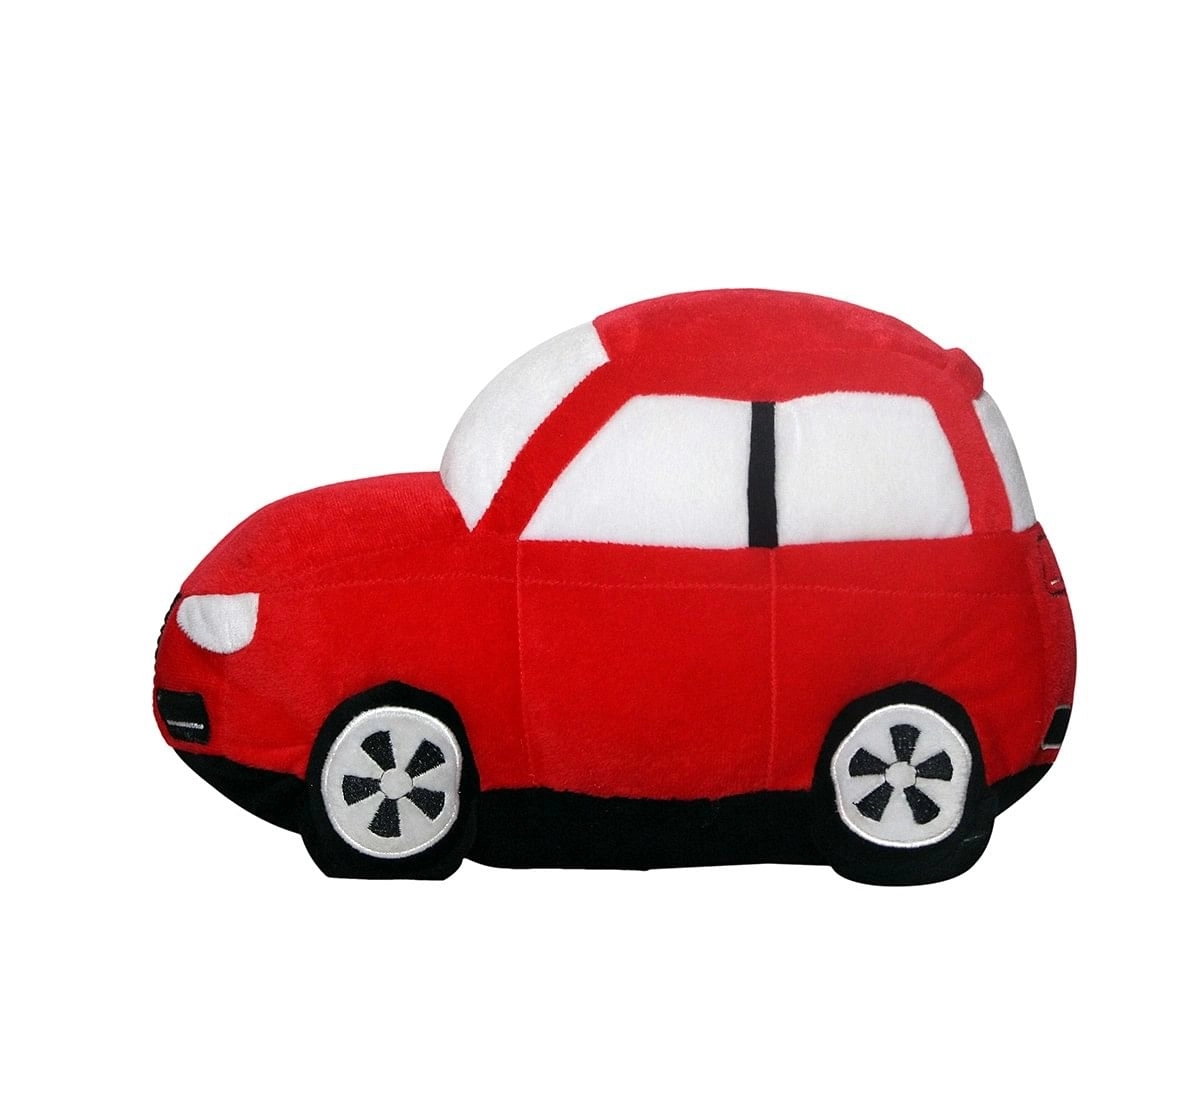 Soft Buddies Big Car Red Quirky Soft Toys for Kids age 12M+ - 22.86 Cm 